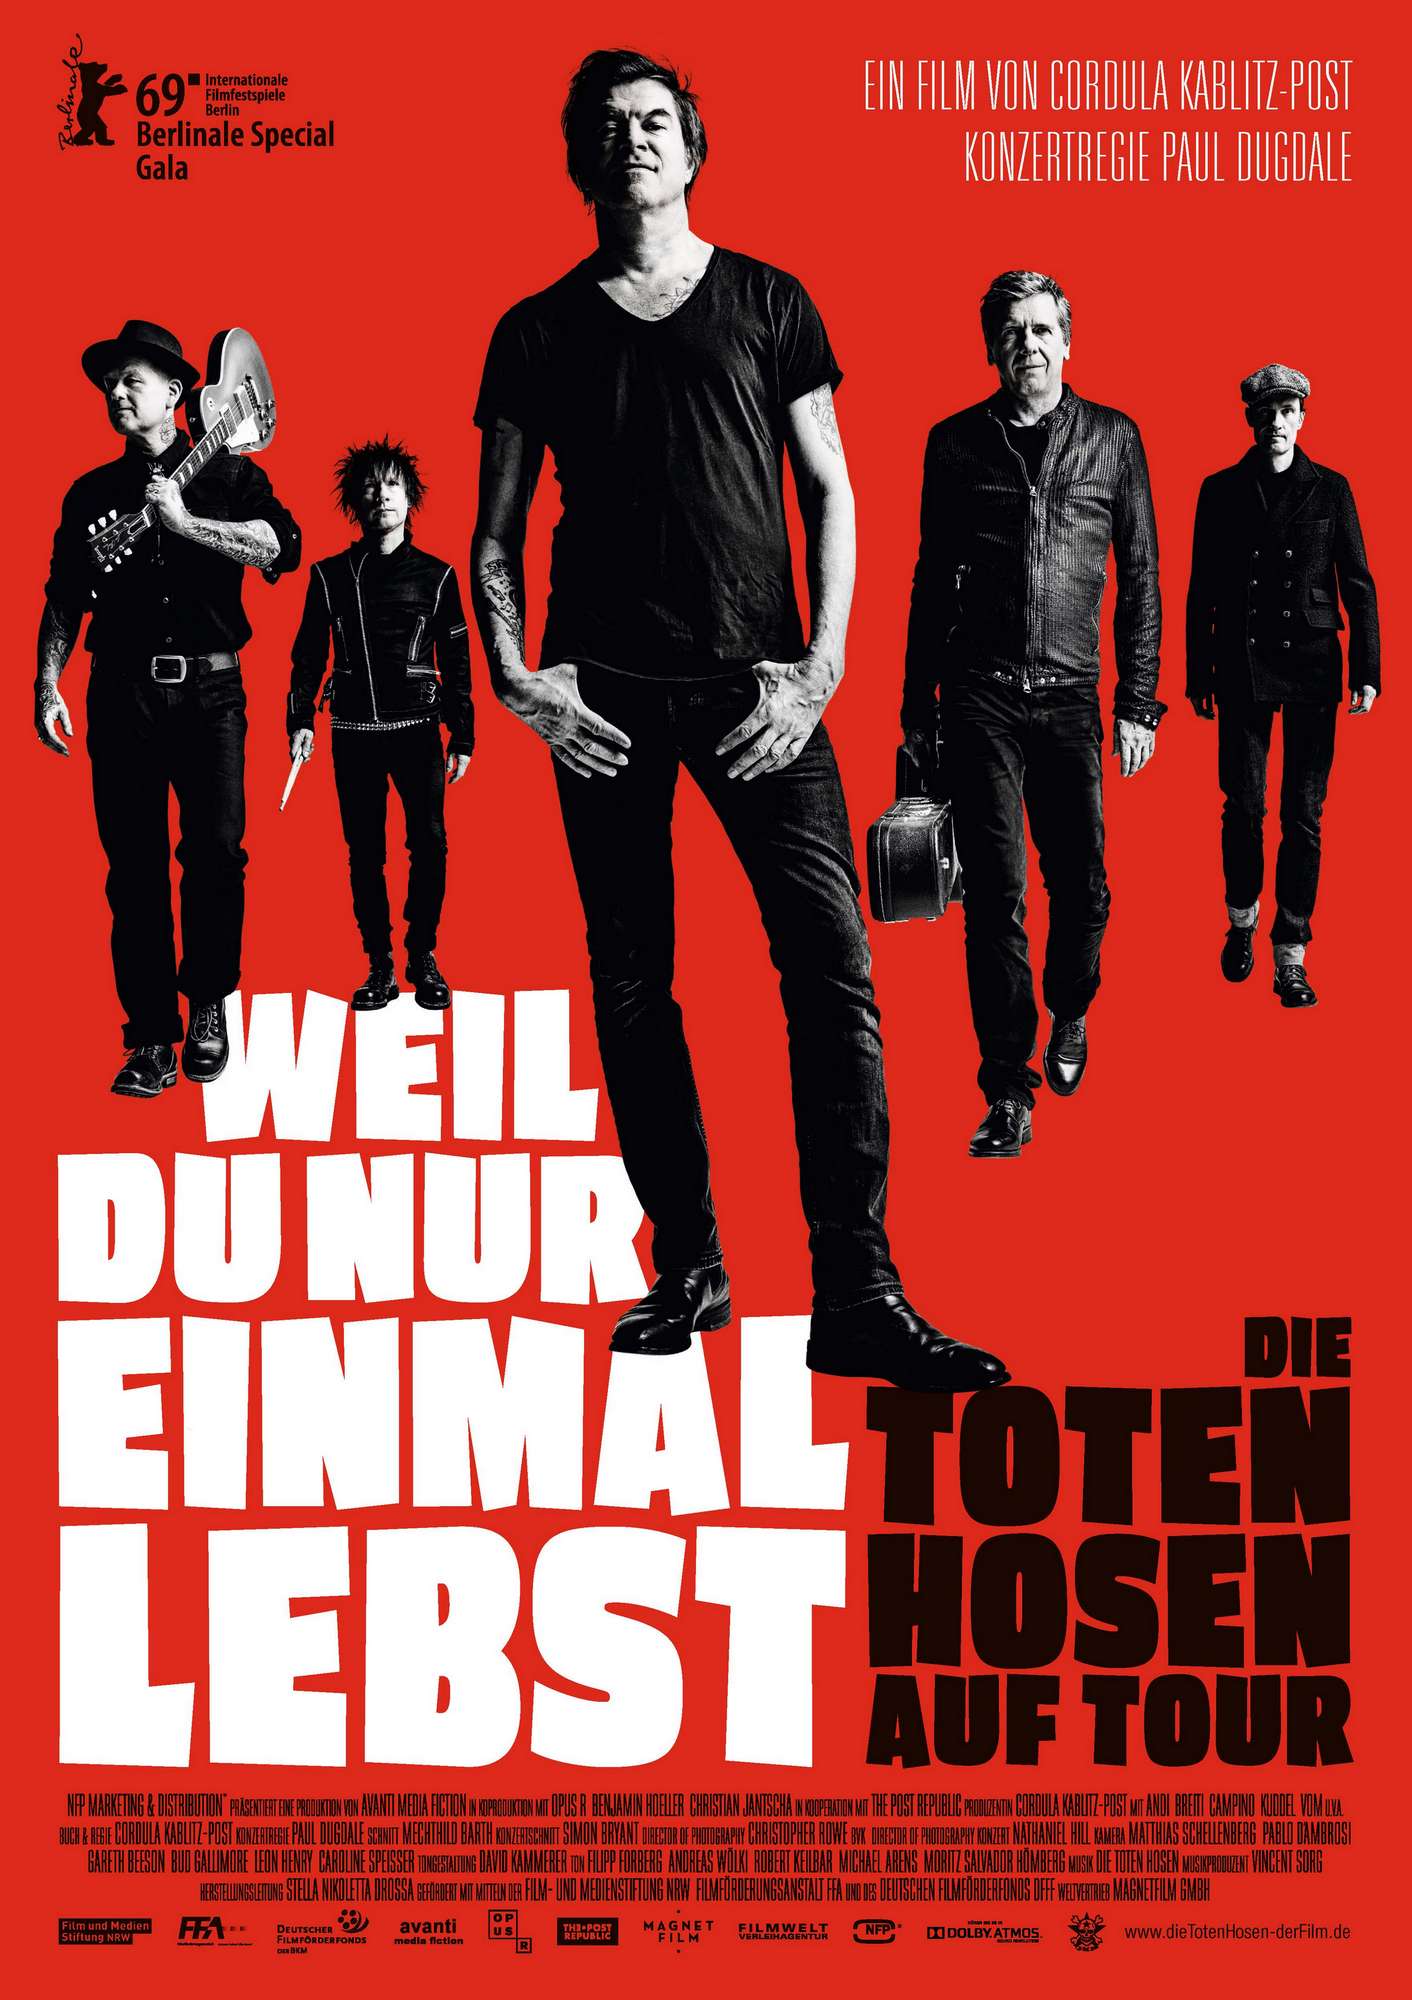 We are happy to announce that our documentary “Die Toten Hosen – You only live once” will be celebrating its World Premiere in the Special Gala section of this year’s 69th Berlinale. The German punkrock band DIE TOTEN HOSEN is a phenomenon of superlatives. The concert documentary shows ...